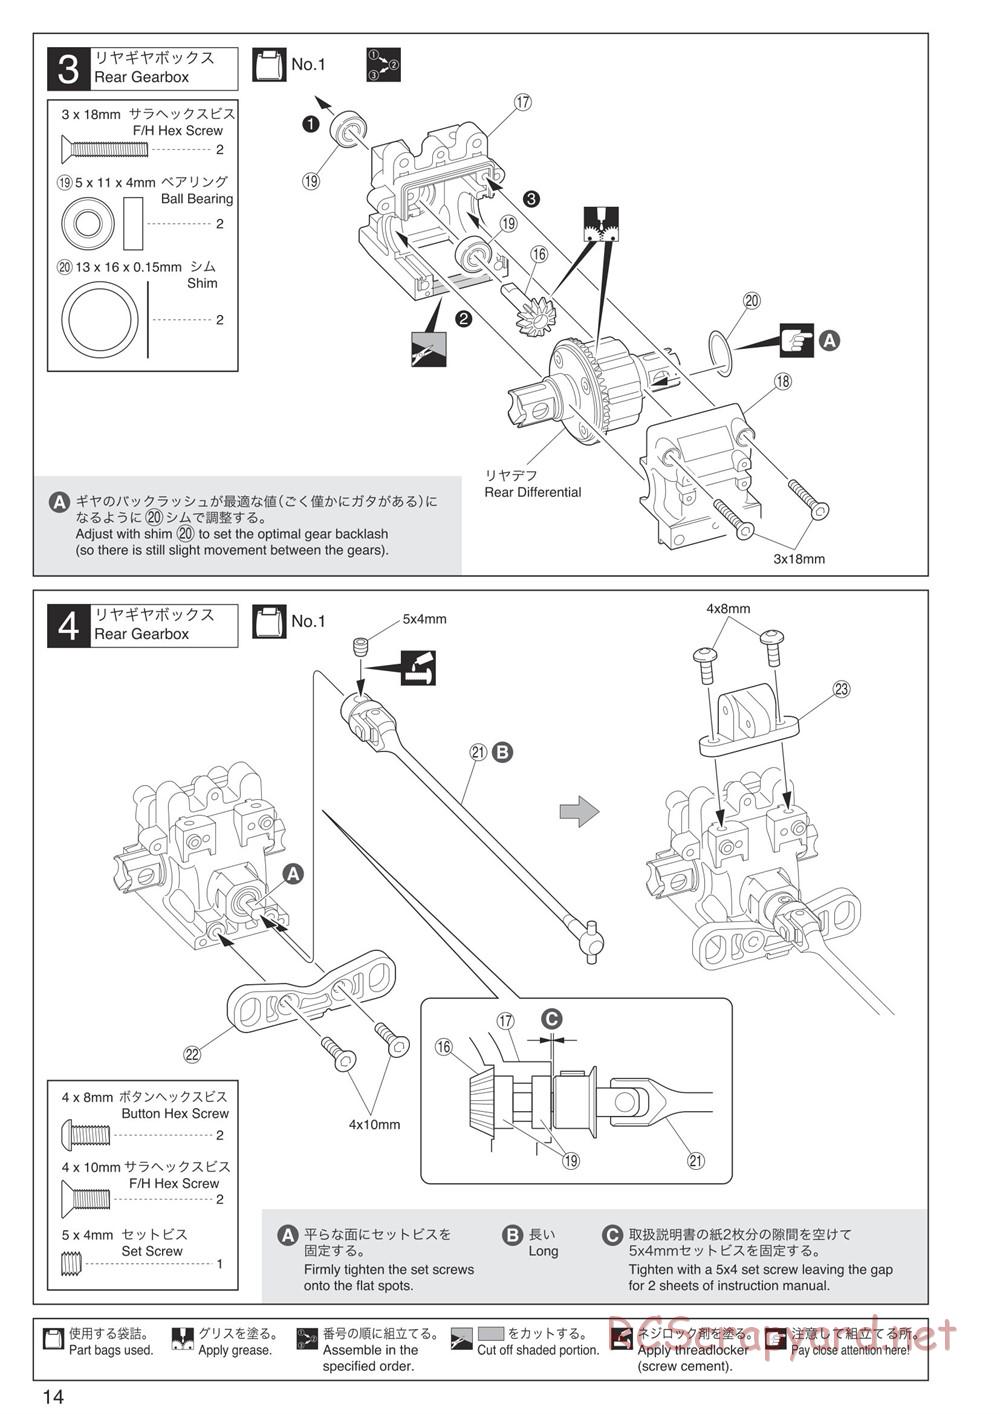 Kyosho - Inferno MP9 TKI4 10th Anniversary Special Edition - Manual - Page 14